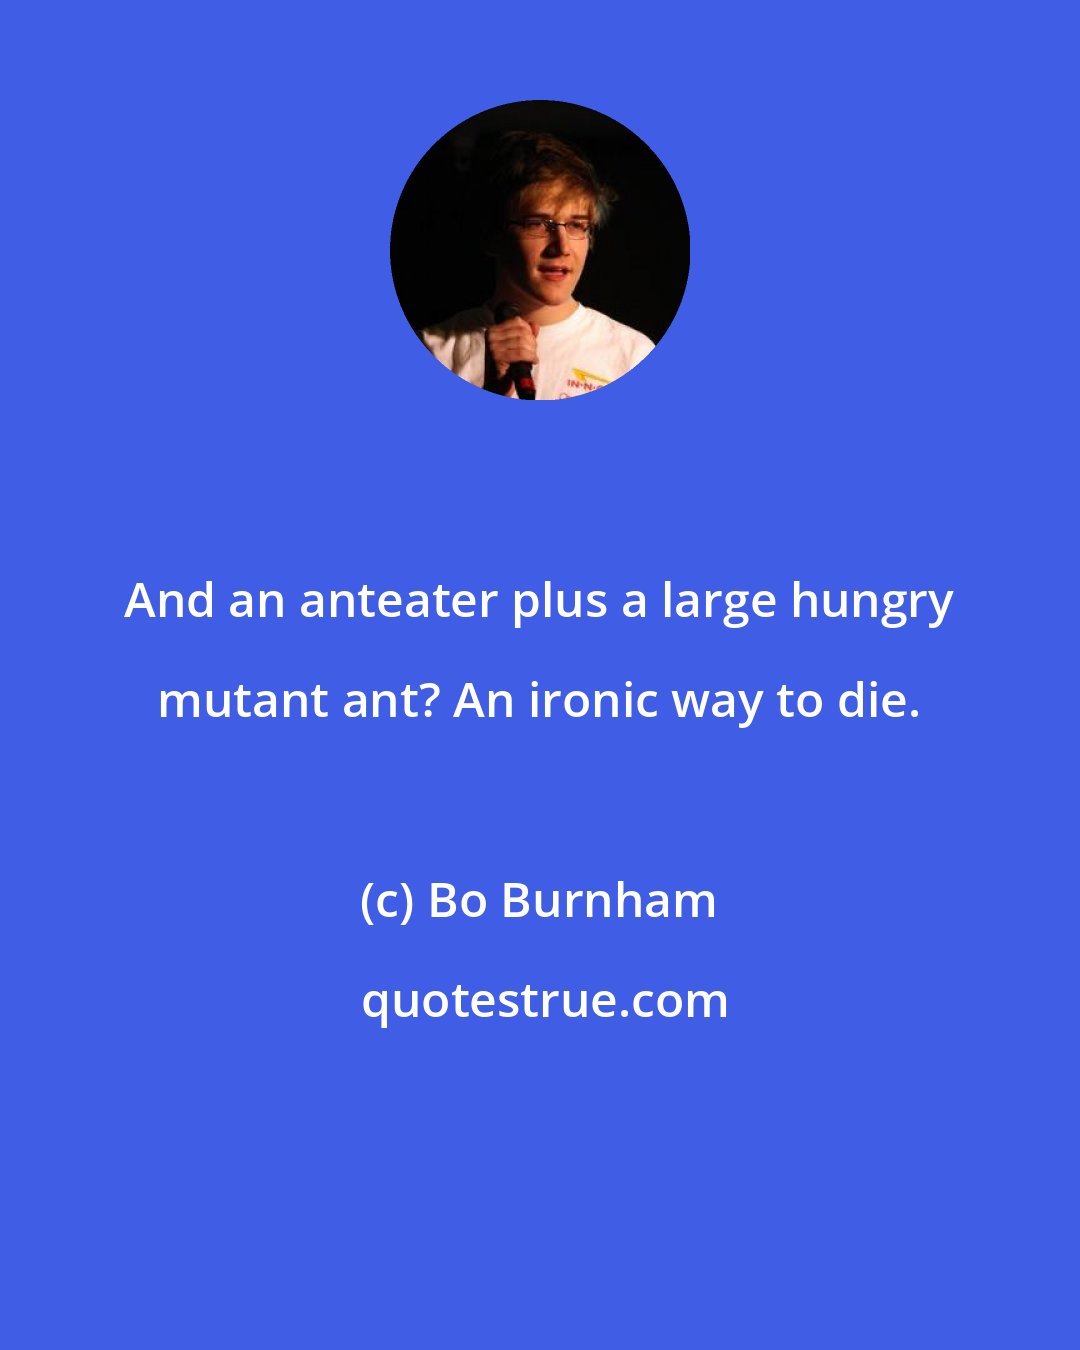 Bo Burnham: And an anteater plus a large hungry mutant ant? An ironic way to die.